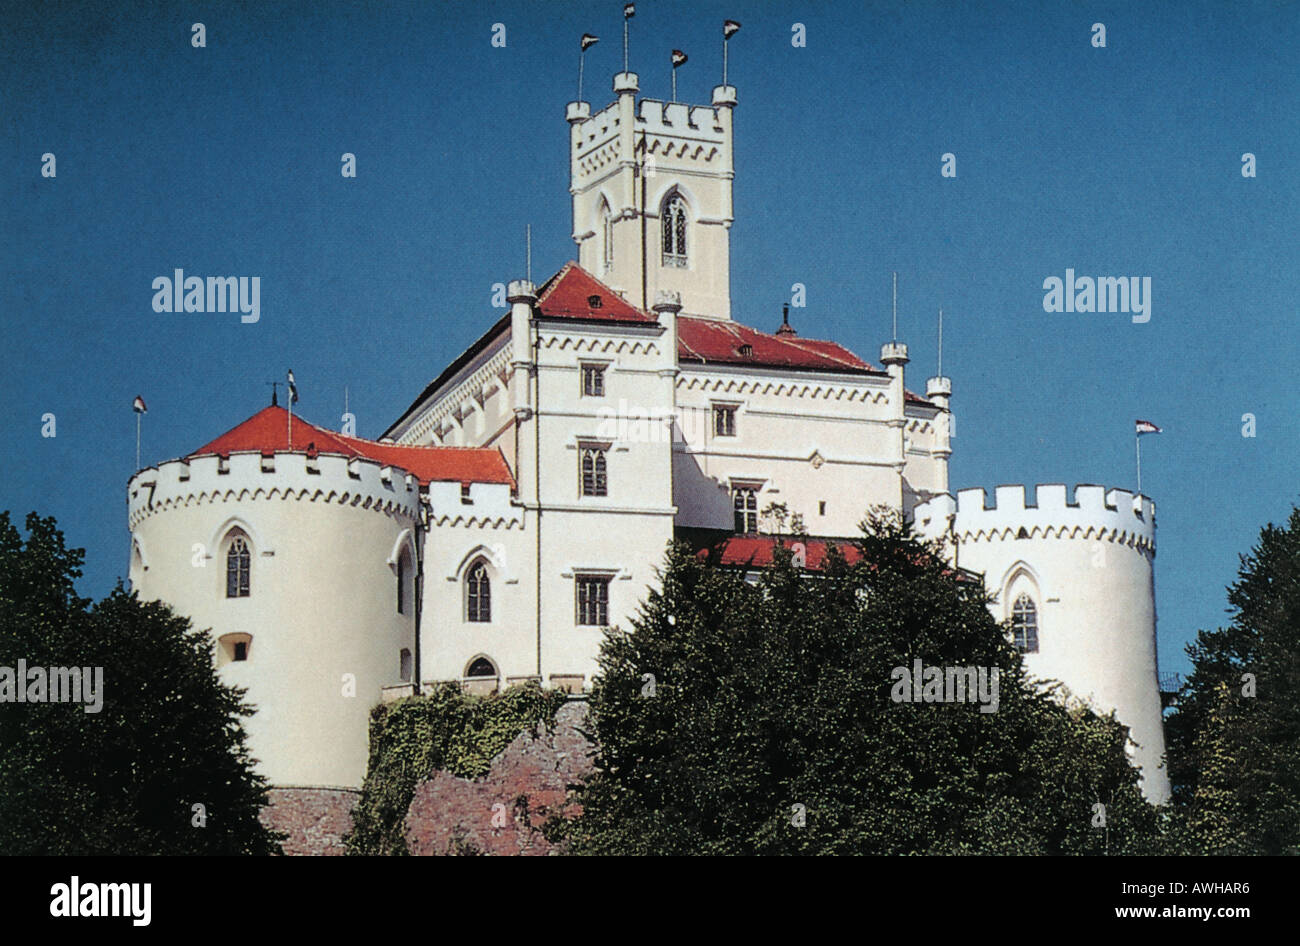 Croatia, Slovonia, Northern Counties, Trakoscan, facade of well-preserved Stock Photo